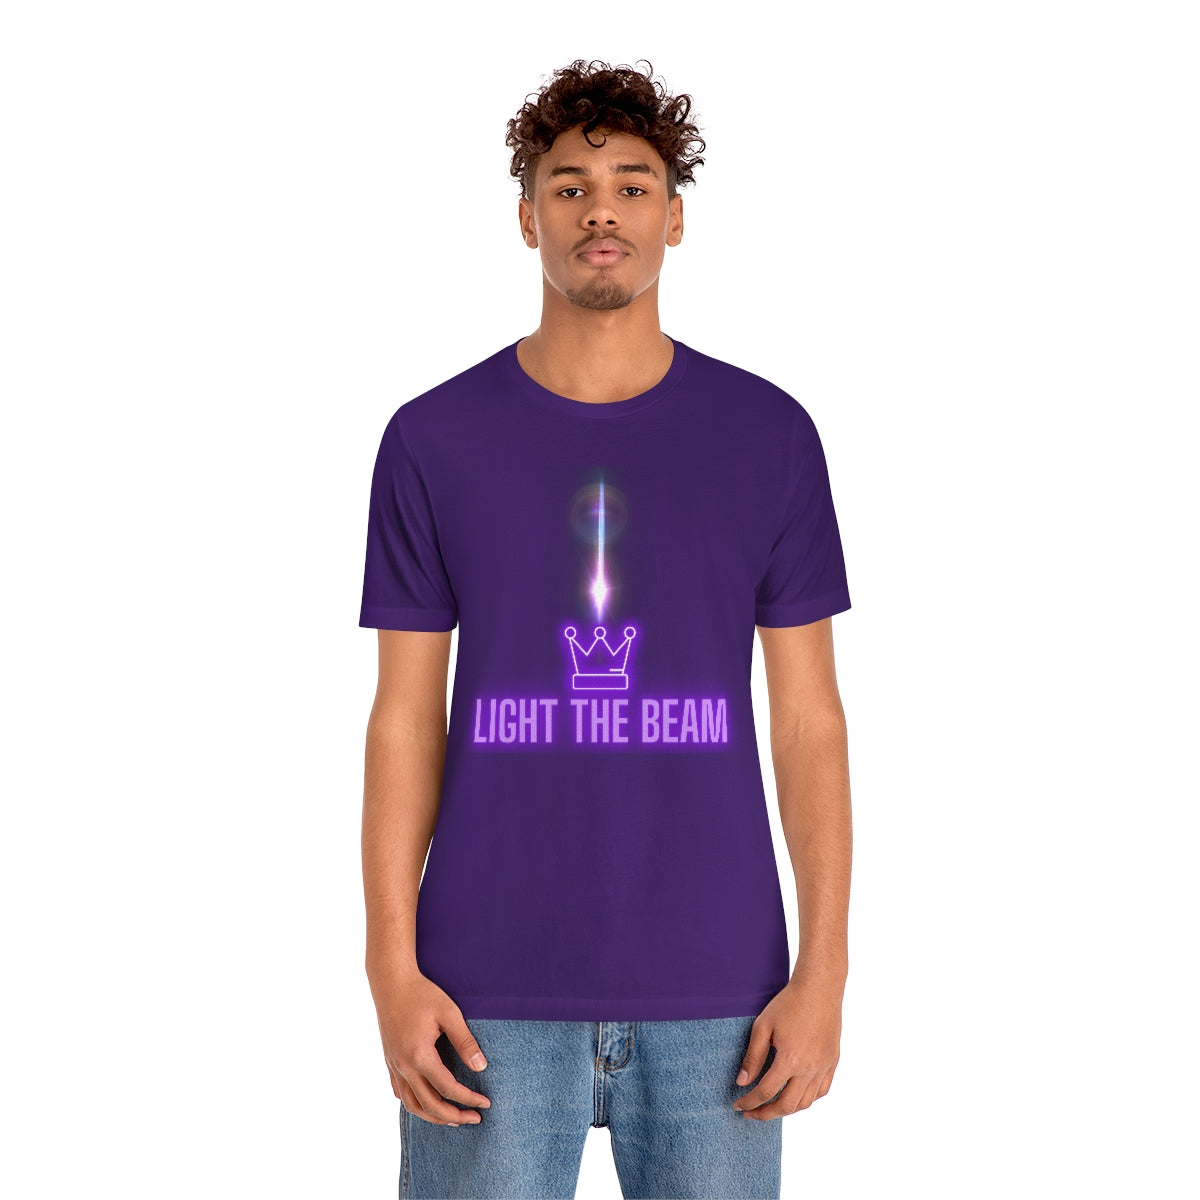 Light the Beam, Sacramento Basketball, Unisex Short Sleeve Tee, Kings Basketball,Light the Beam! This Kings Basketball T-shirt is the perfect way to celebrate another W - WIN - for your Sacramento Basketball team in this comfortable, cool shirt. Perfect to sport at the game or show-off the day after another W. It's going to be an epic season for our Kings team - show off your Sac-Town pride.